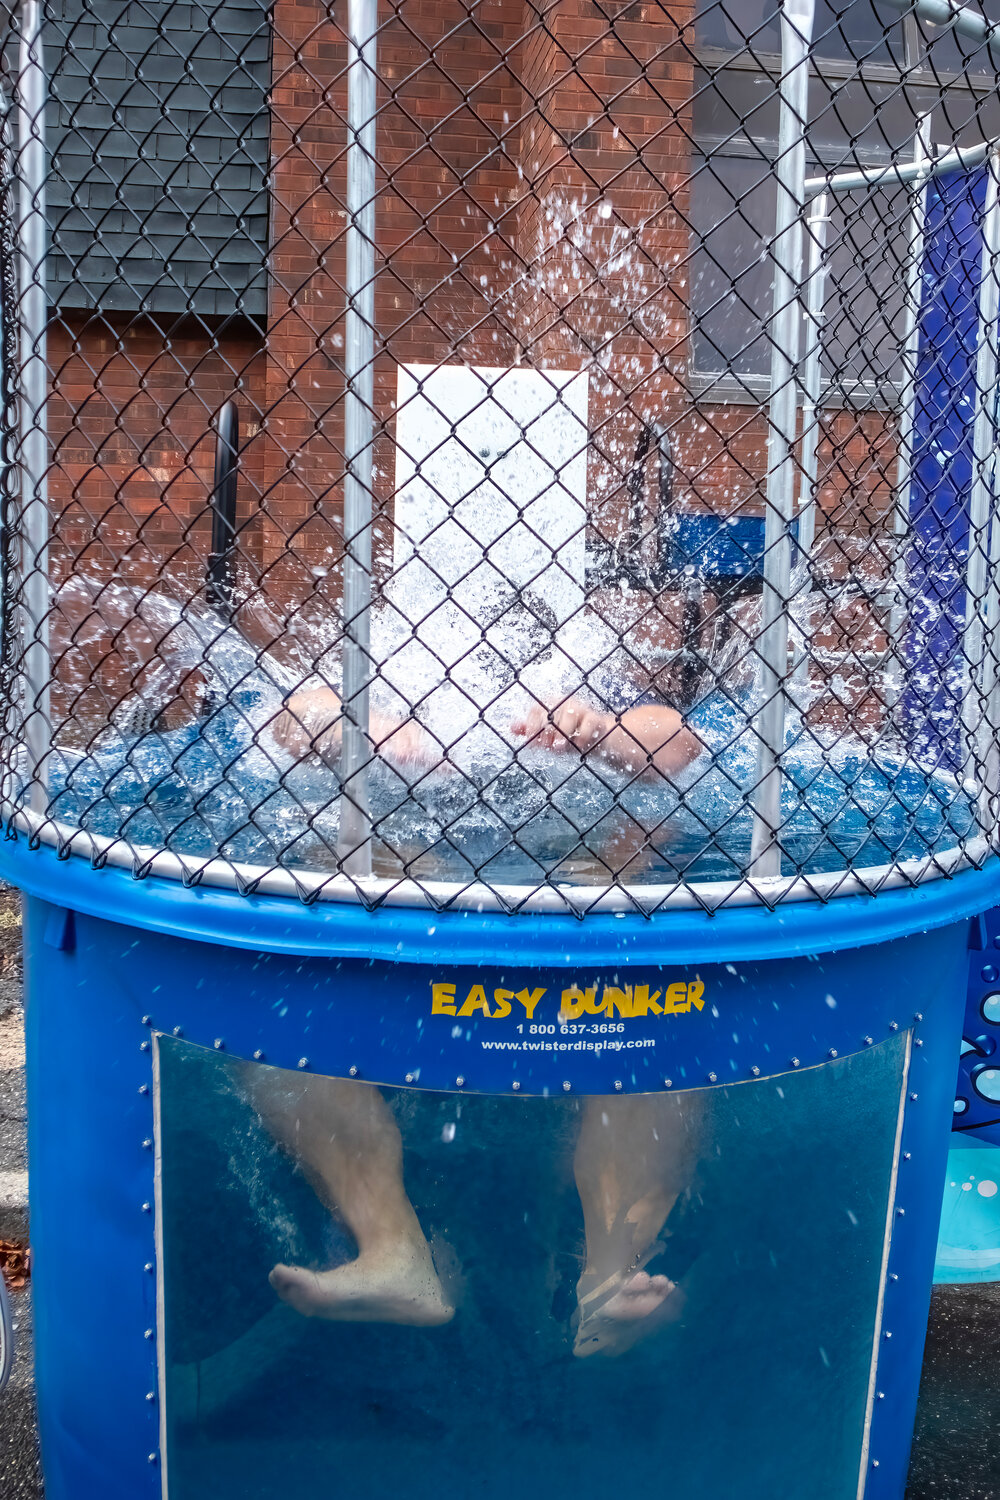 Splashdown! Tom Castagna got wet for fun in the Easy Dunker at the LWA barbecue.